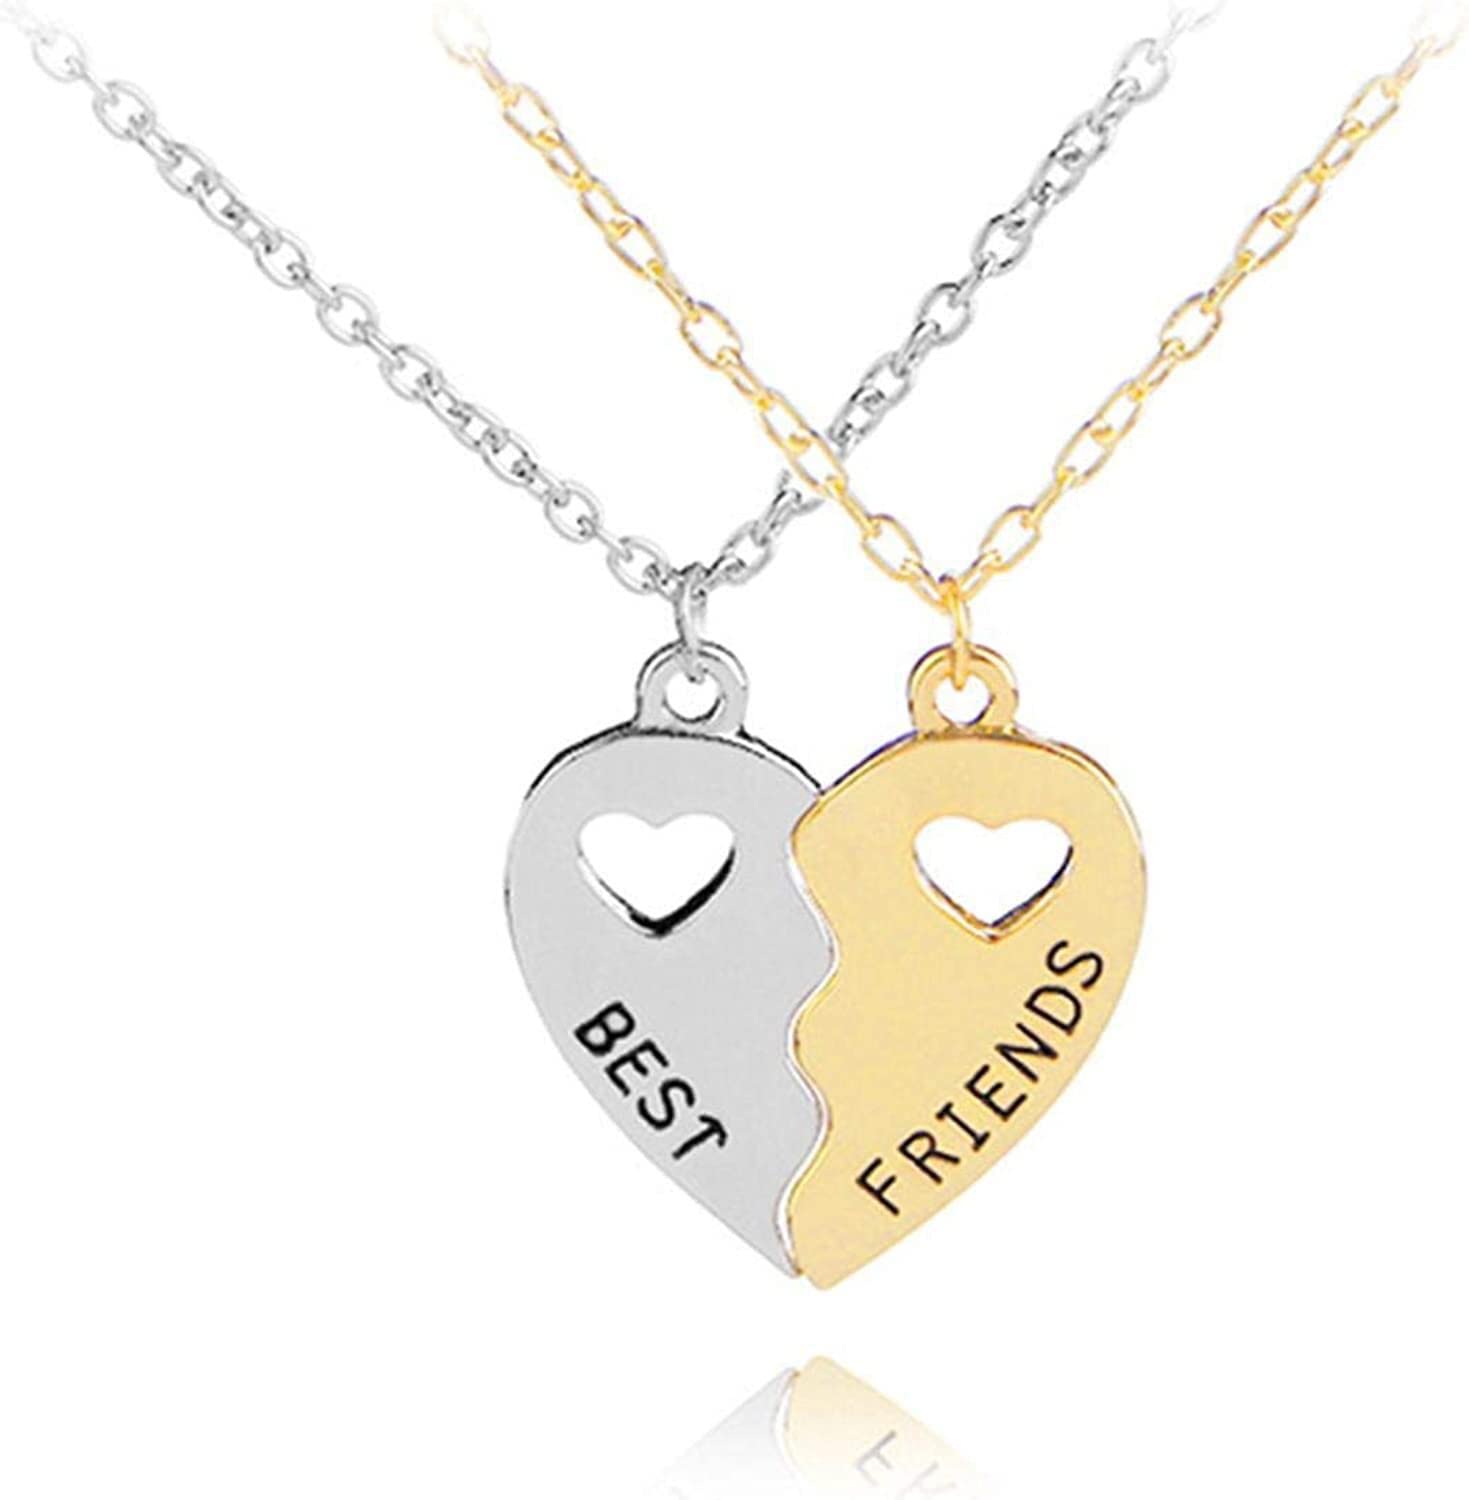 Heart Hollow Out Best Friends Engraved Pendant Friendship Necklace Set Of 2 Silver And Golden Dexterous and professional